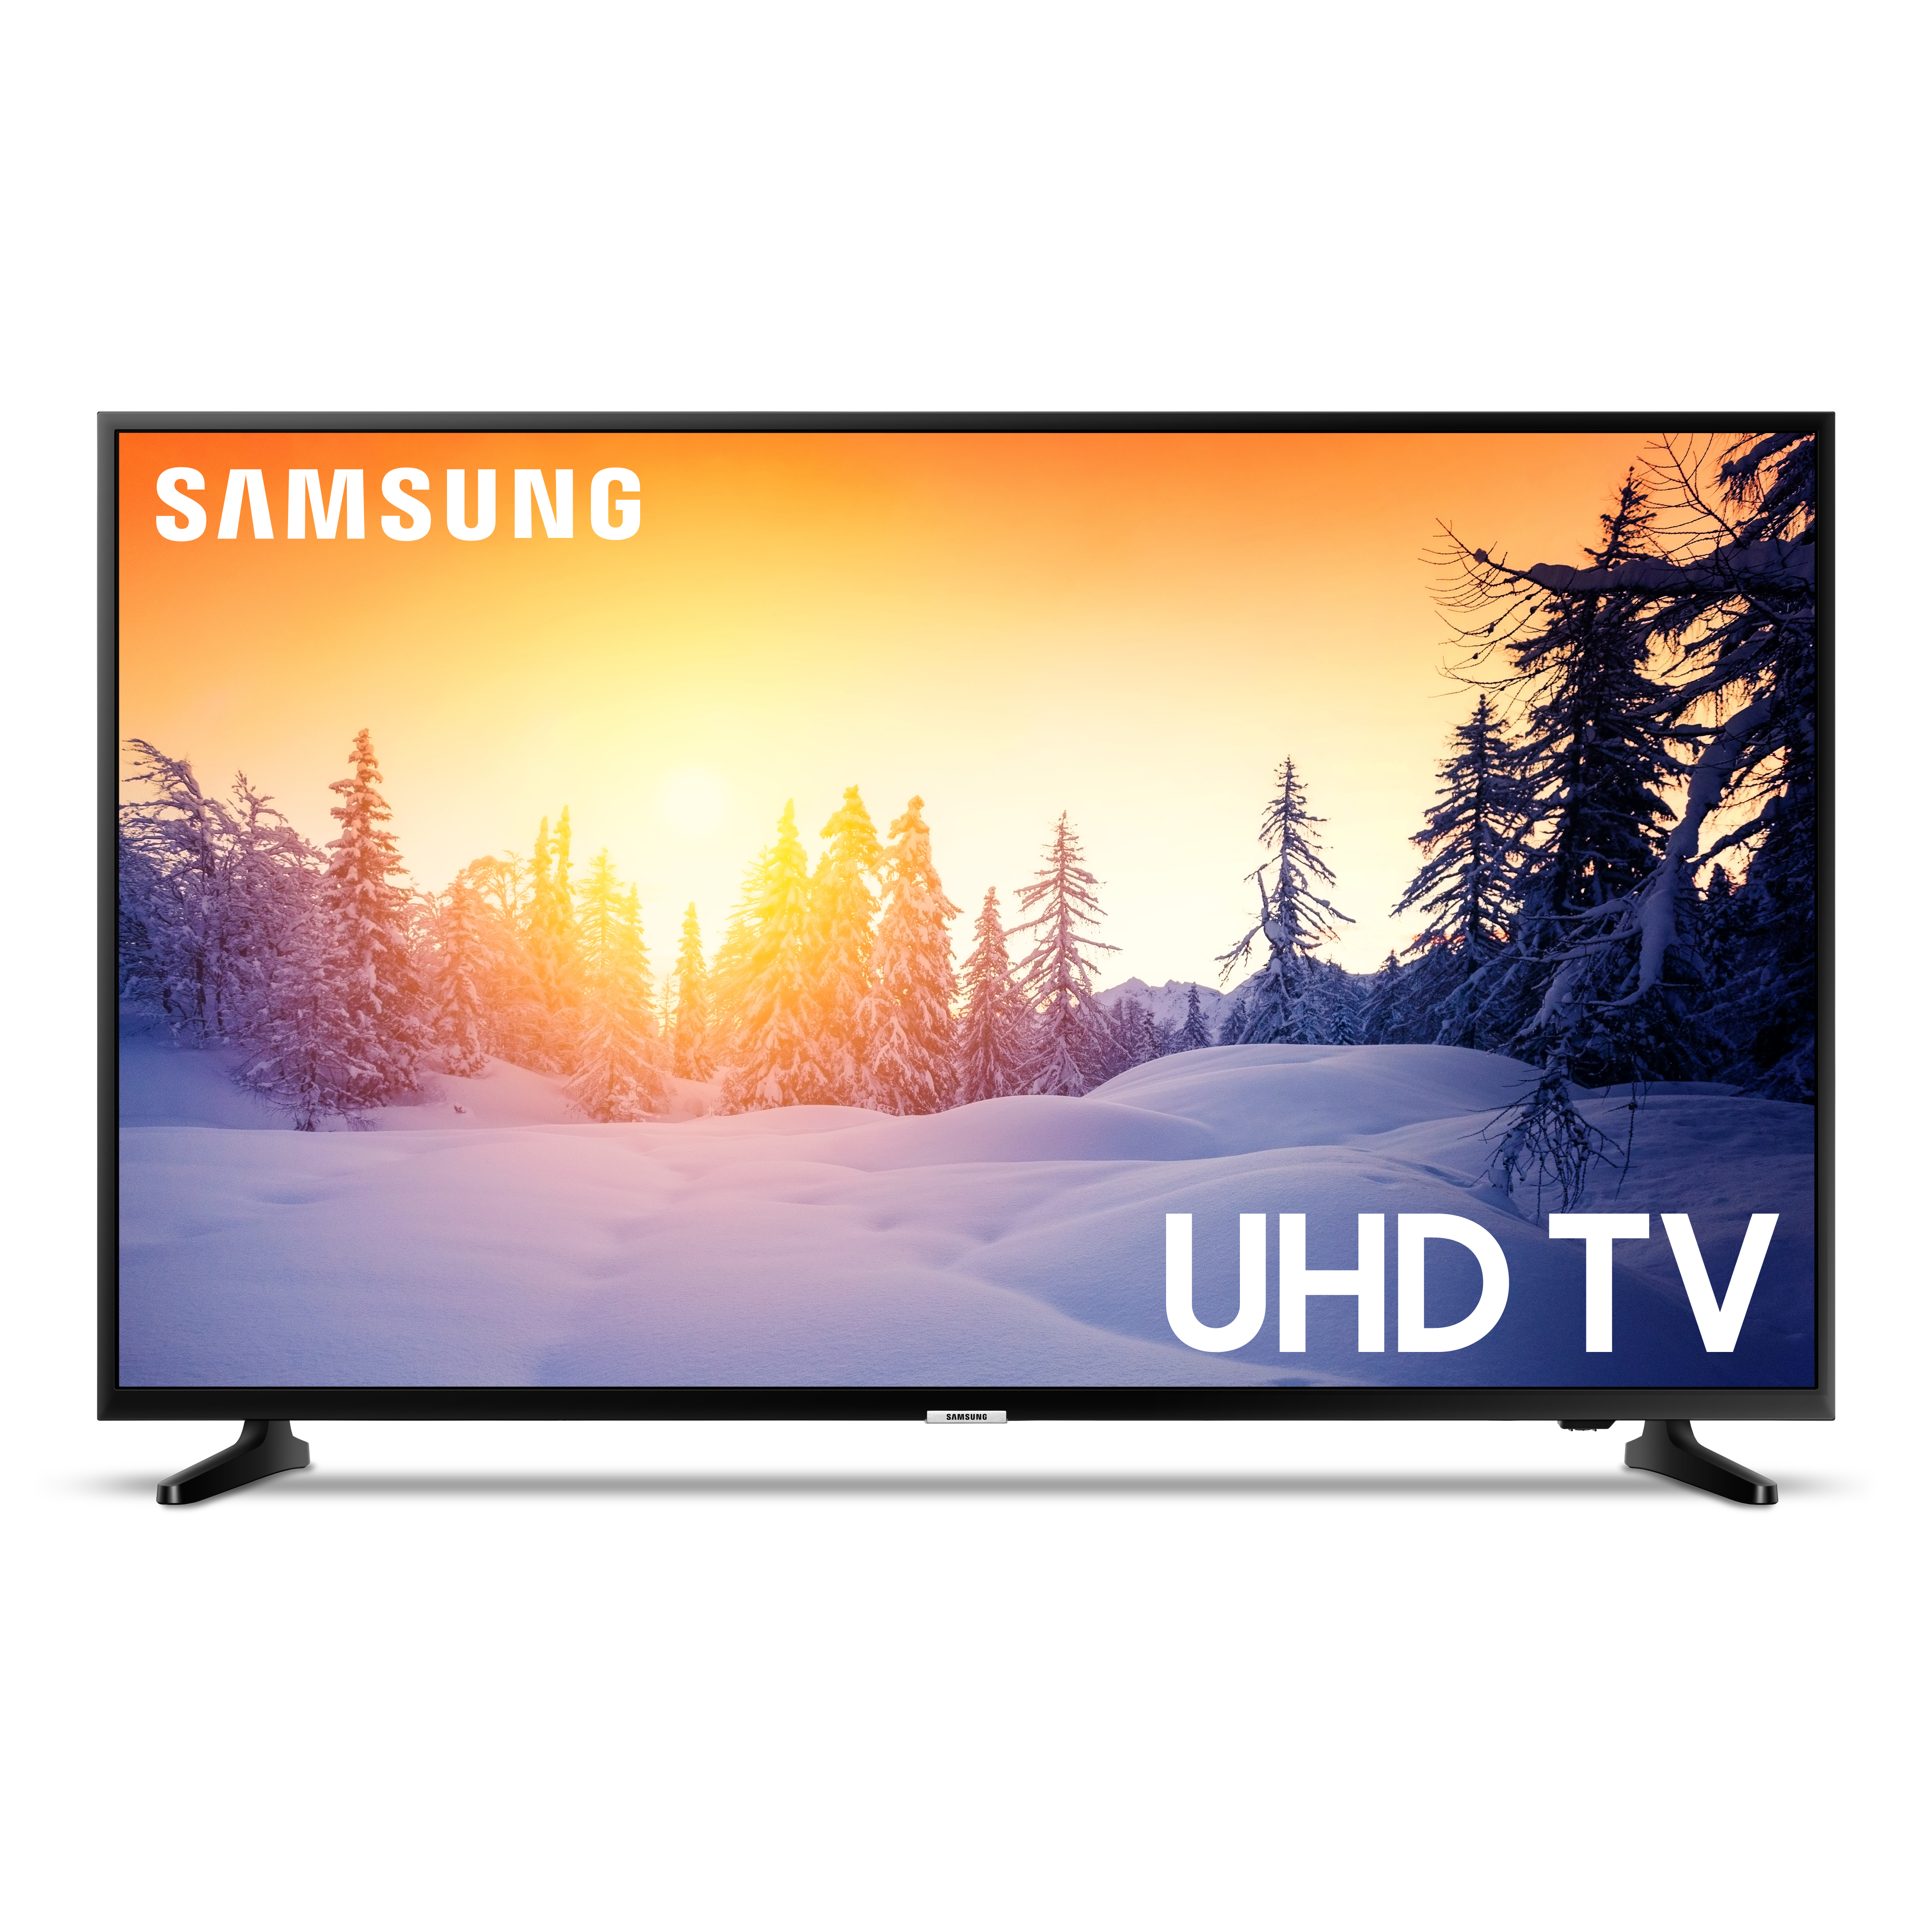 SAMSUNG 55" Class 4K UHD 2160p LED Smart TV with HDR UN55NU6900 - image 1 of 23